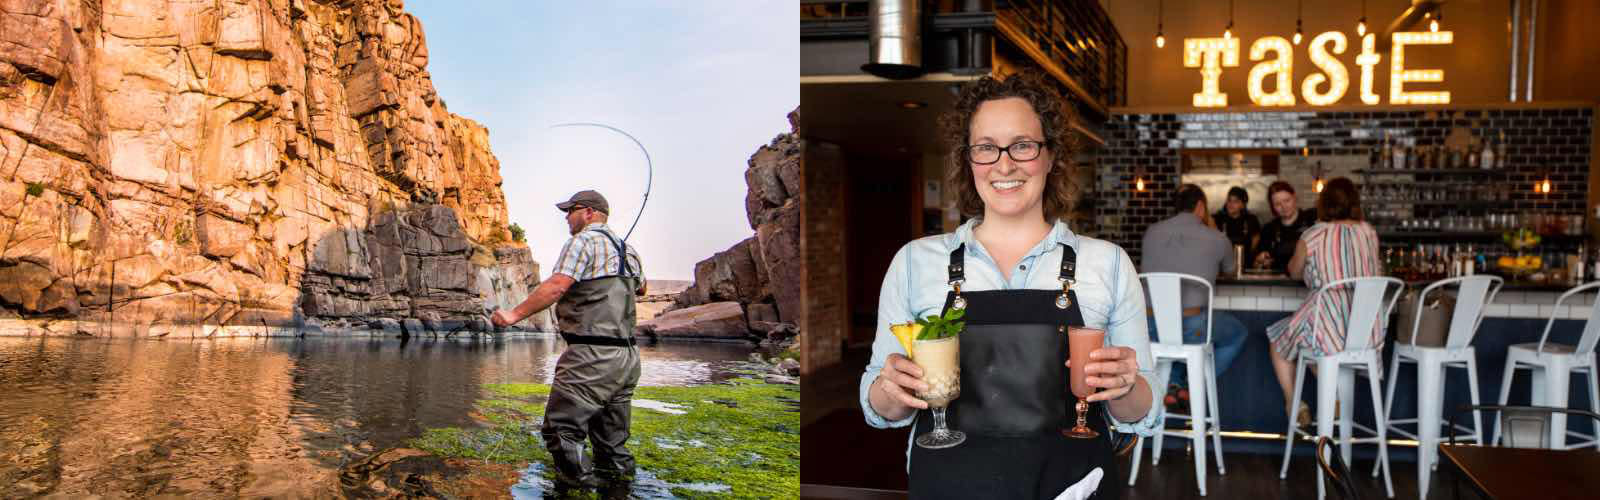 A man wearing full waders is fly fishing in Fremont Canyon surrounded by high rock cliffs on a trip to Casper, Wyoming and A female server wearing a leather apron and a big smile  is standing with two cocktails in her hands.